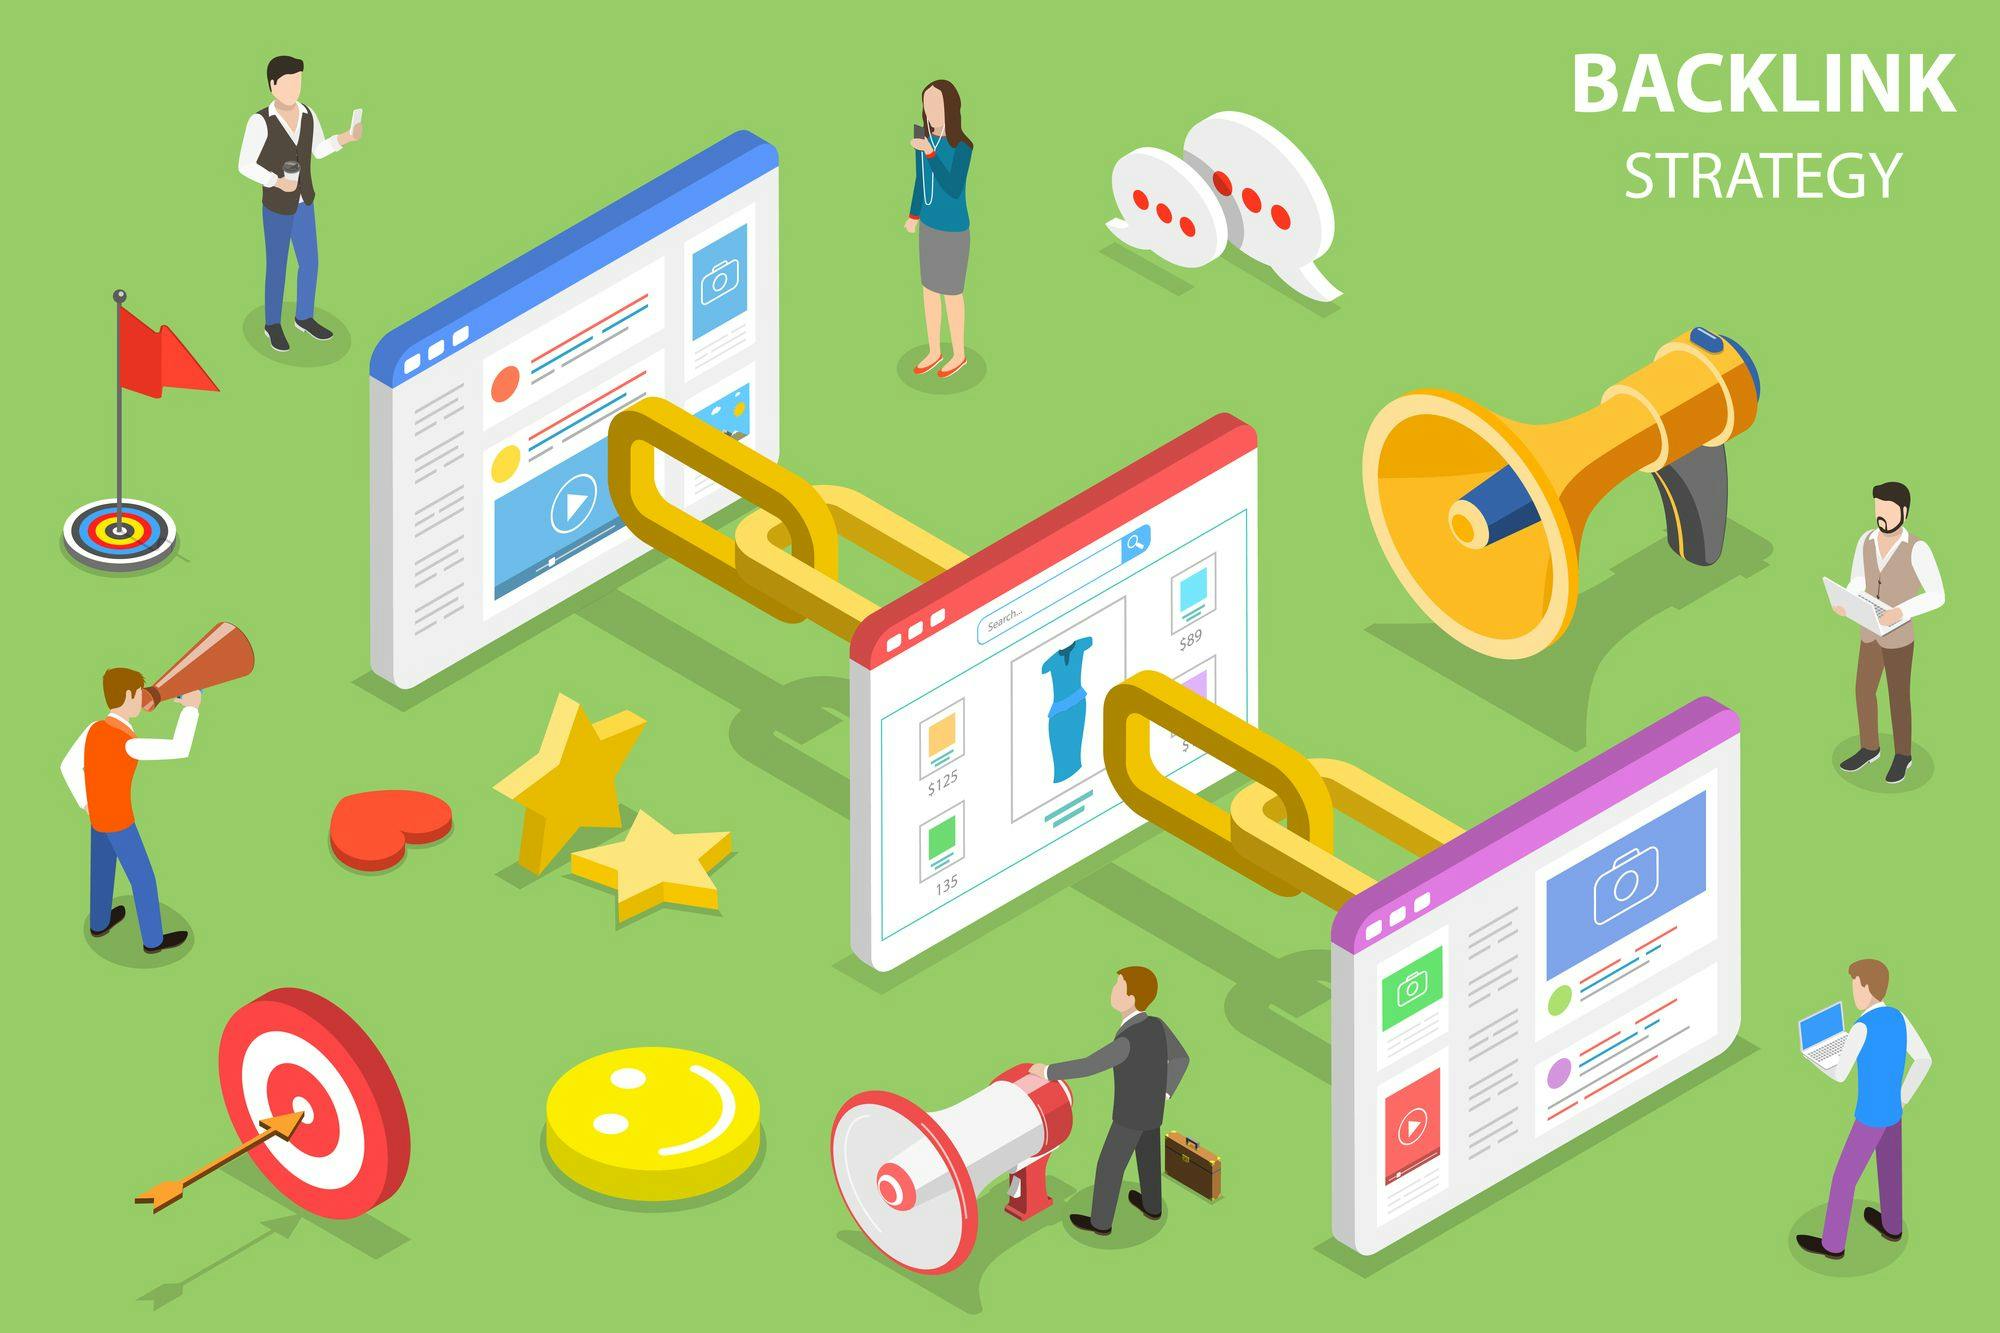 Discover the essentials of backlink building, SEO optimization, and enhancing your online business presence with Total Care Websites.